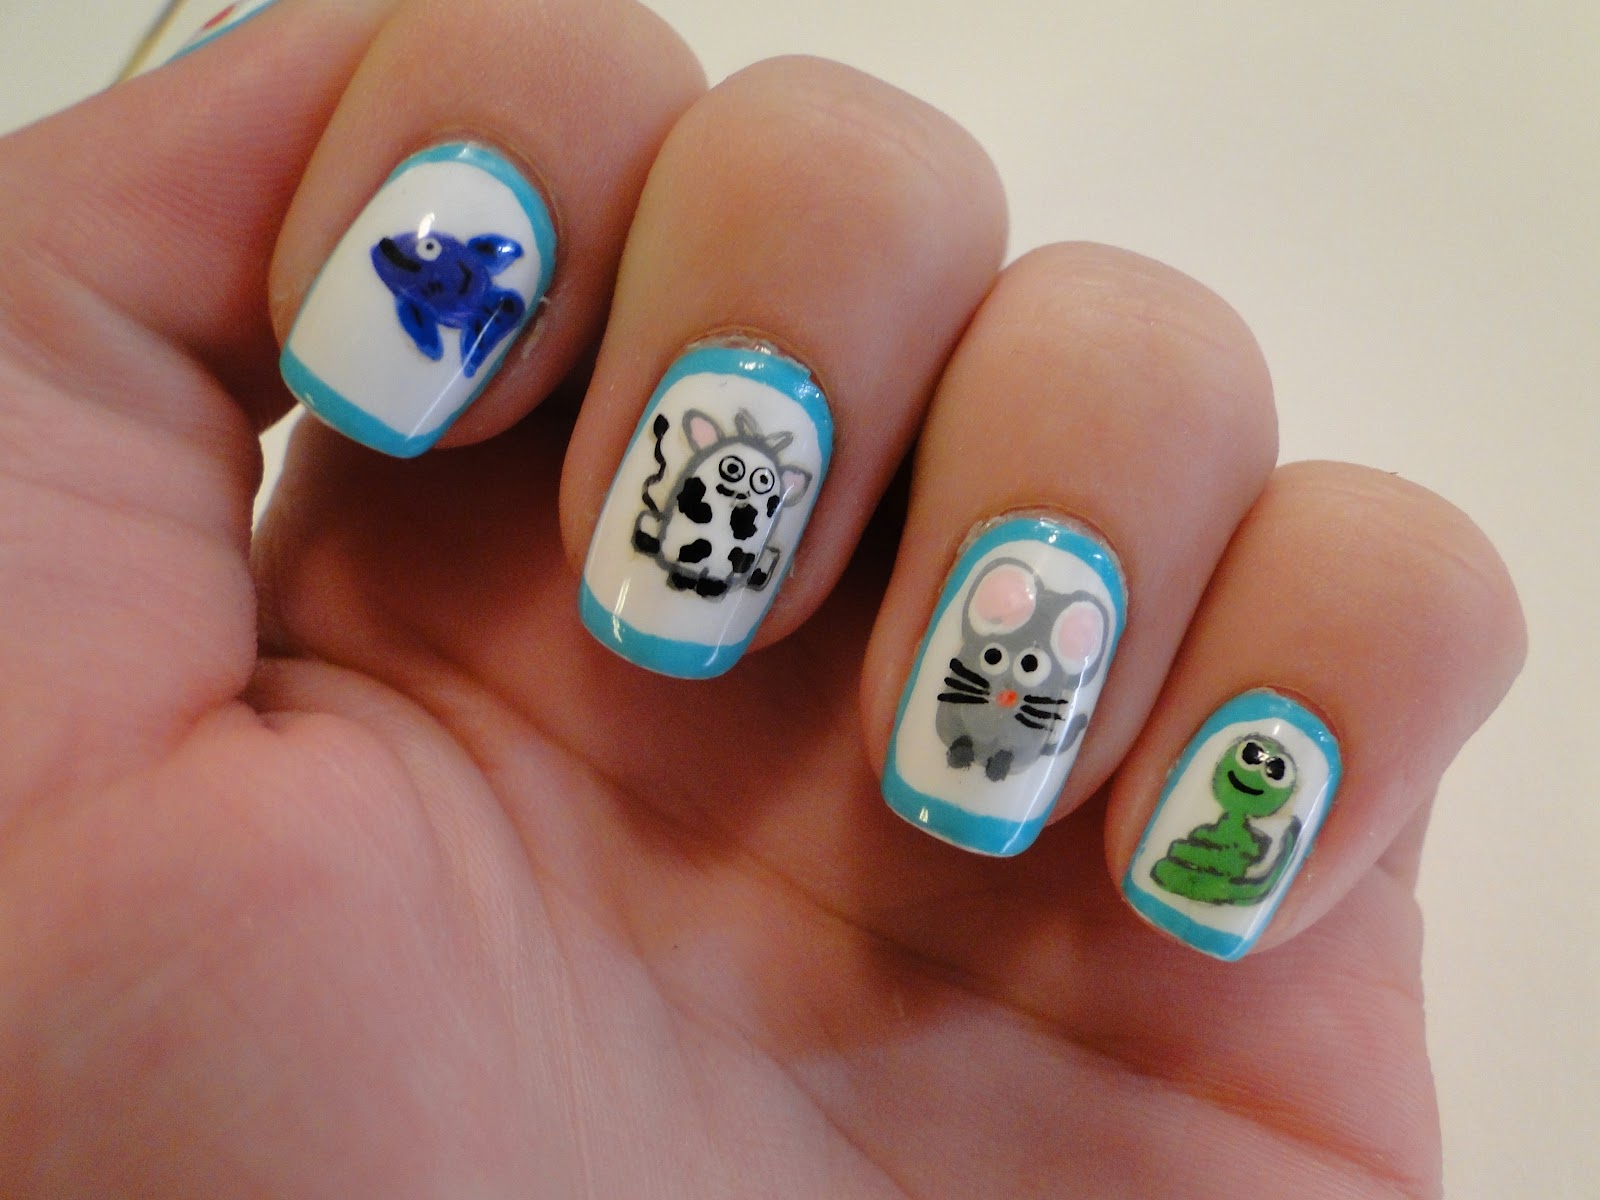 3. Cute Animal Nail Art for Beginners - wide 4